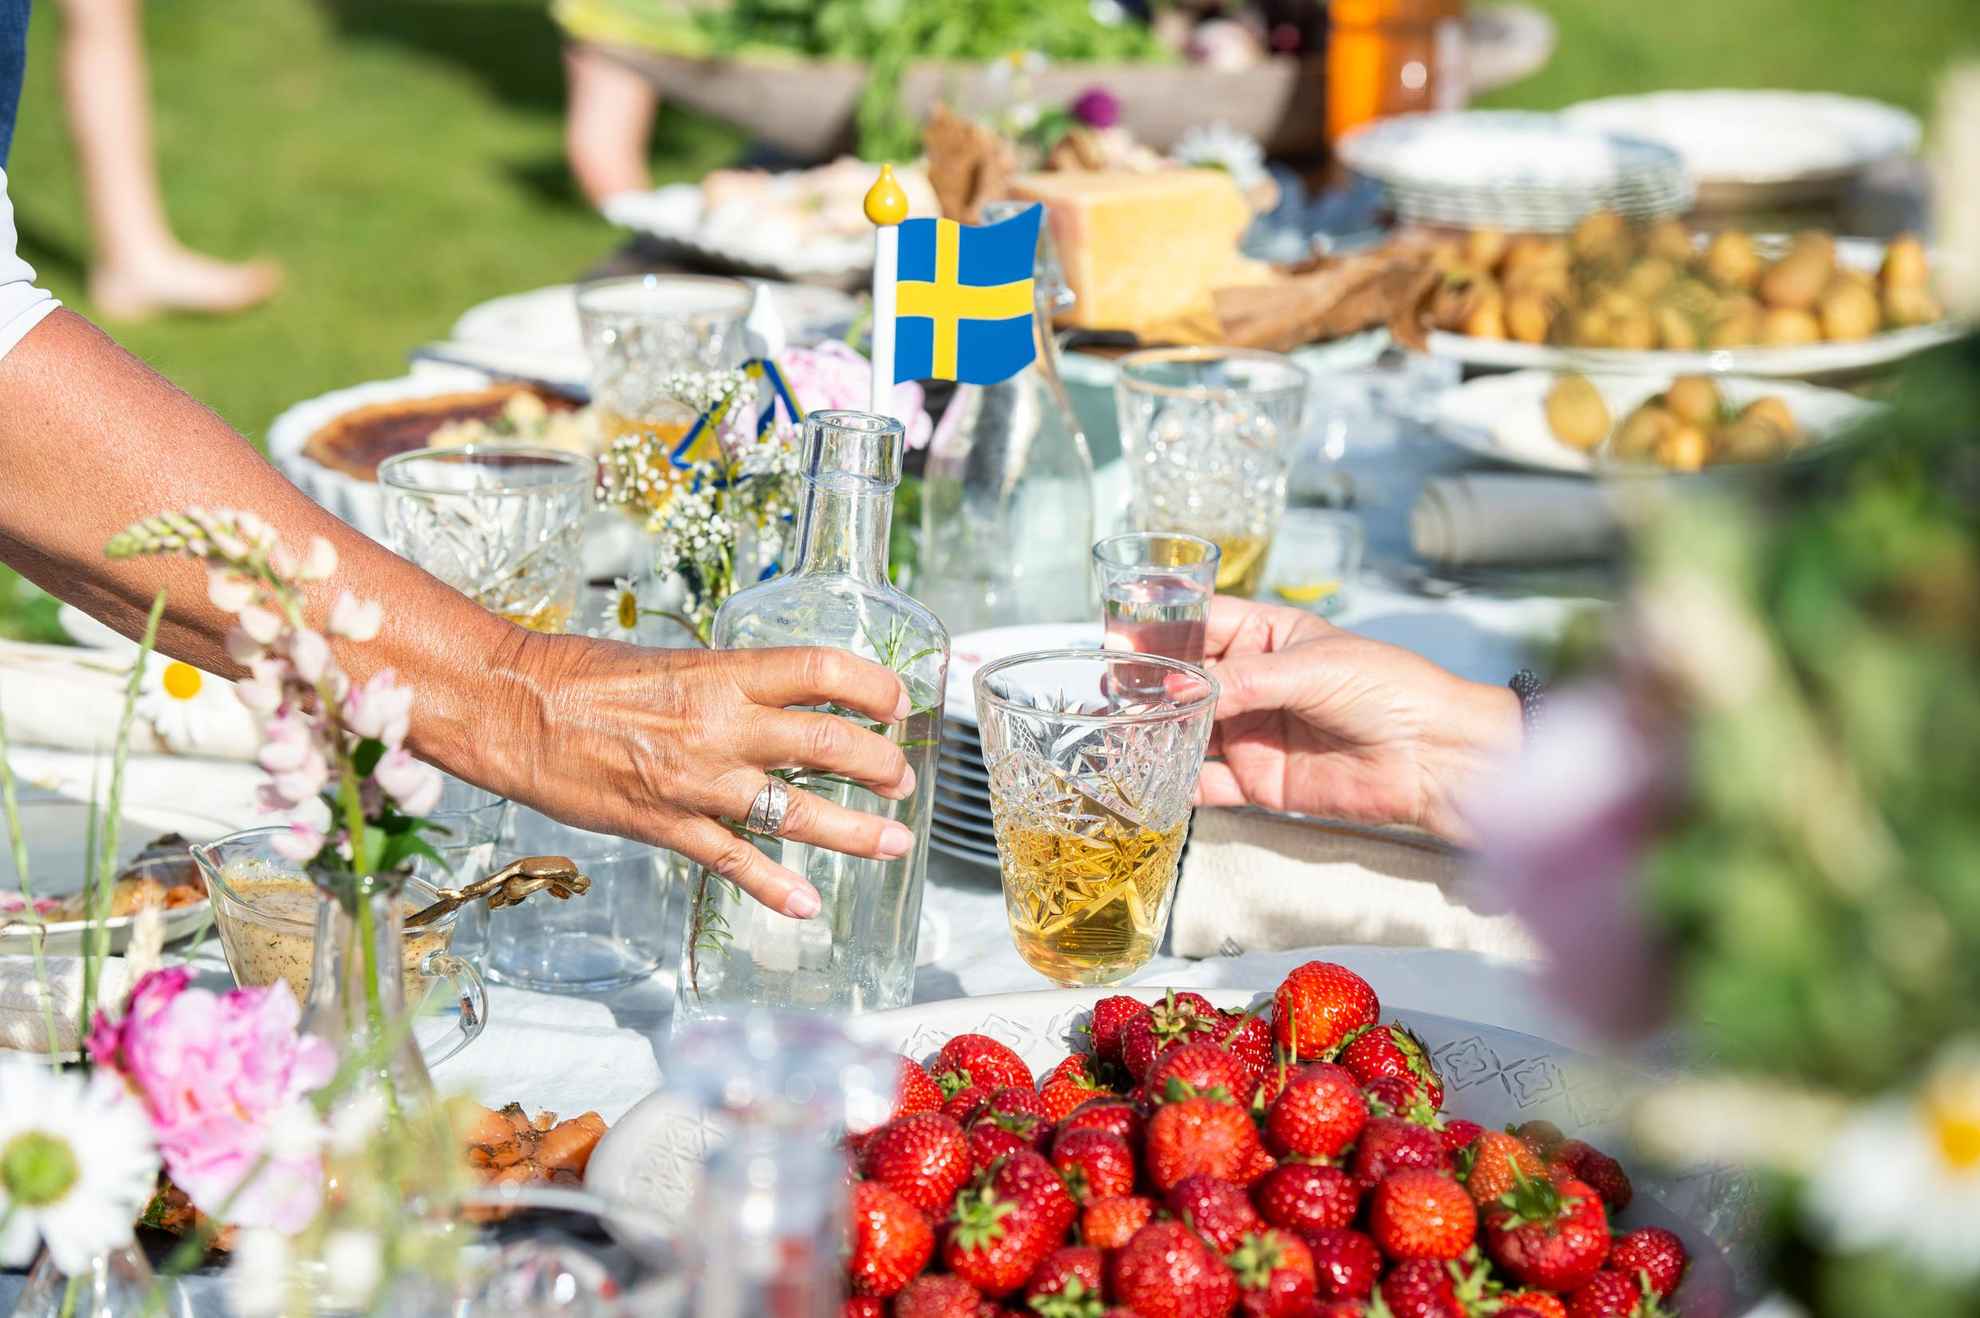 A table set for midsummer lunch with traditional food. A hand is holding a bottle of snaps and another hand is holding glass of snaps. In the foreground there is a bowl of strawberries.